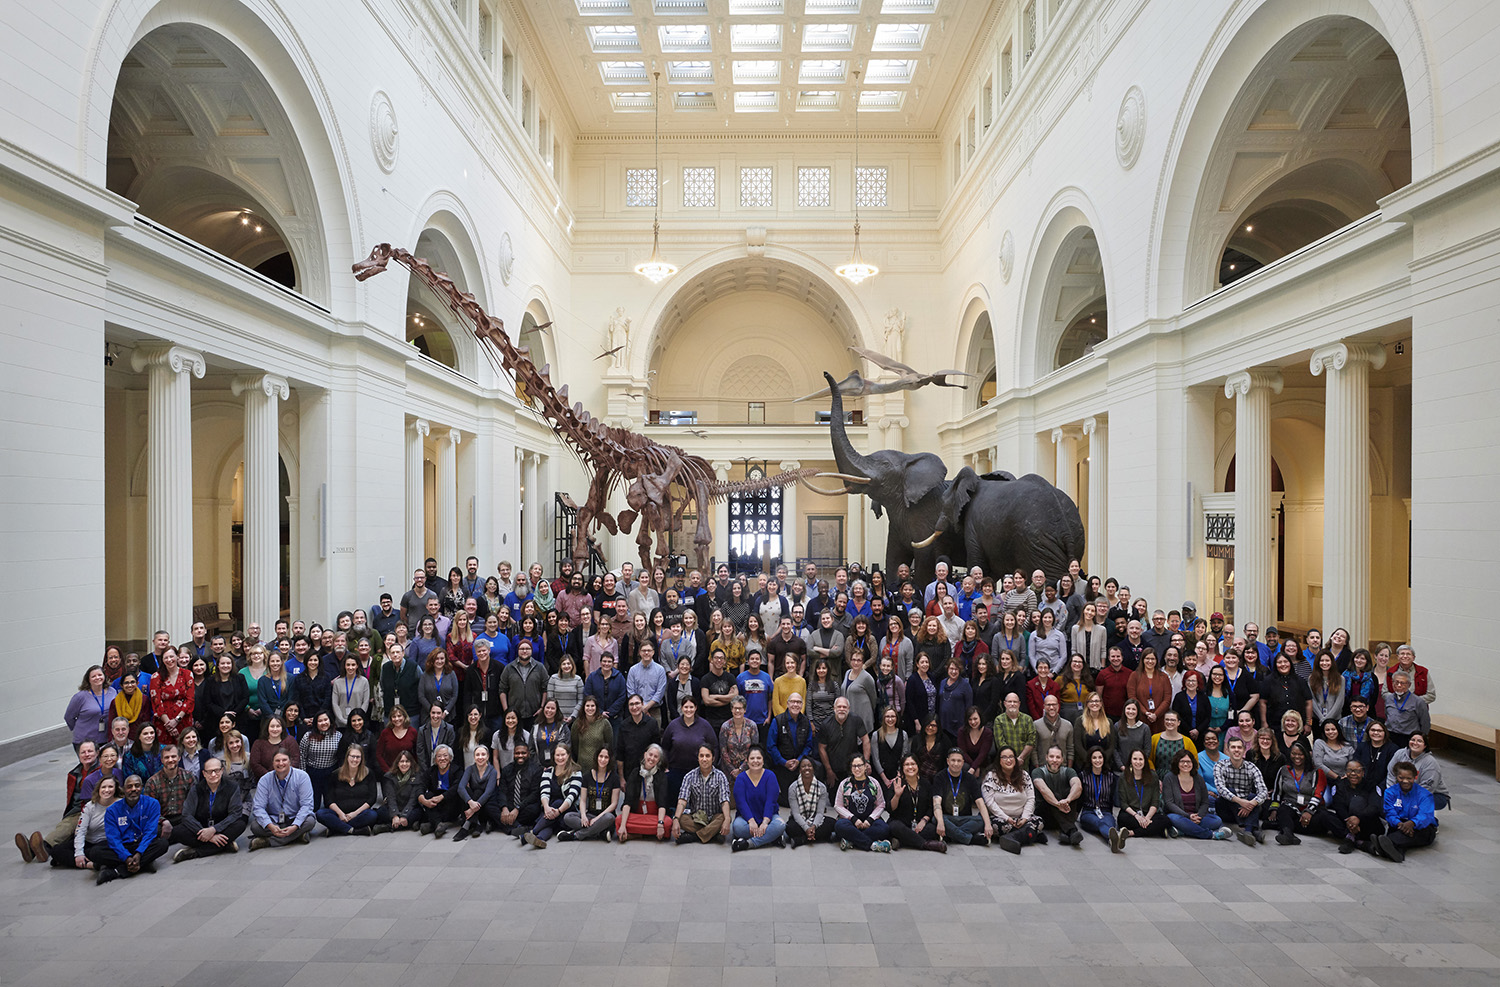 Field Museum staff pose for a group photo in Stanley Field Hall, standing in front of Maximo the Titanosaur and taxidermied African elephants.